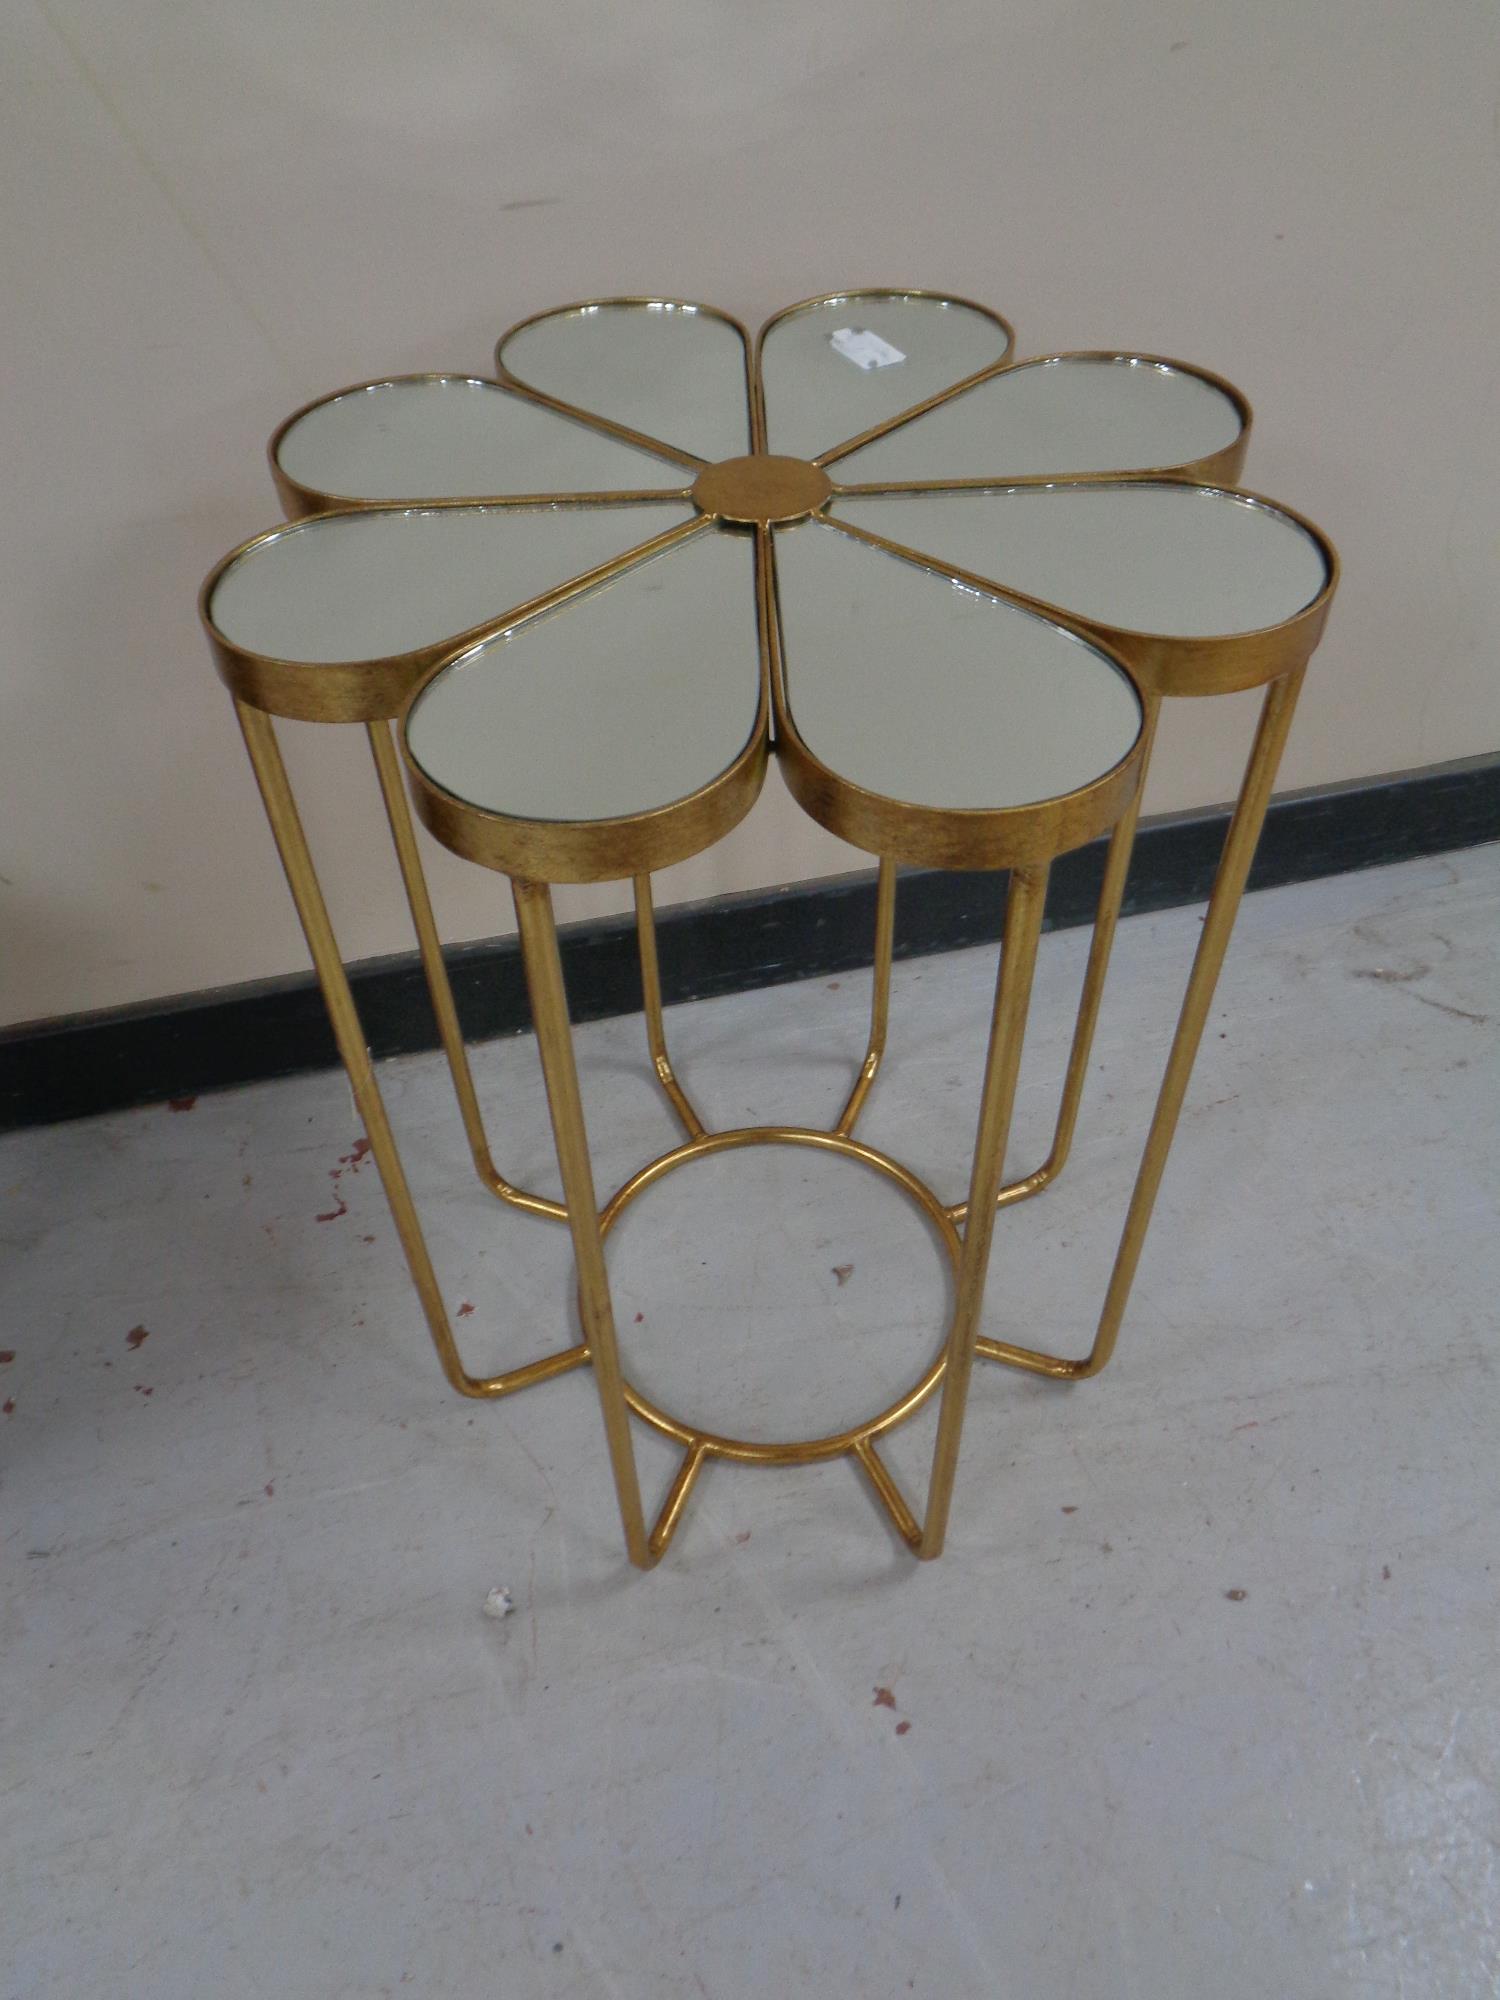 A contemporary metal mirrored topped occasional table in the form of a flower